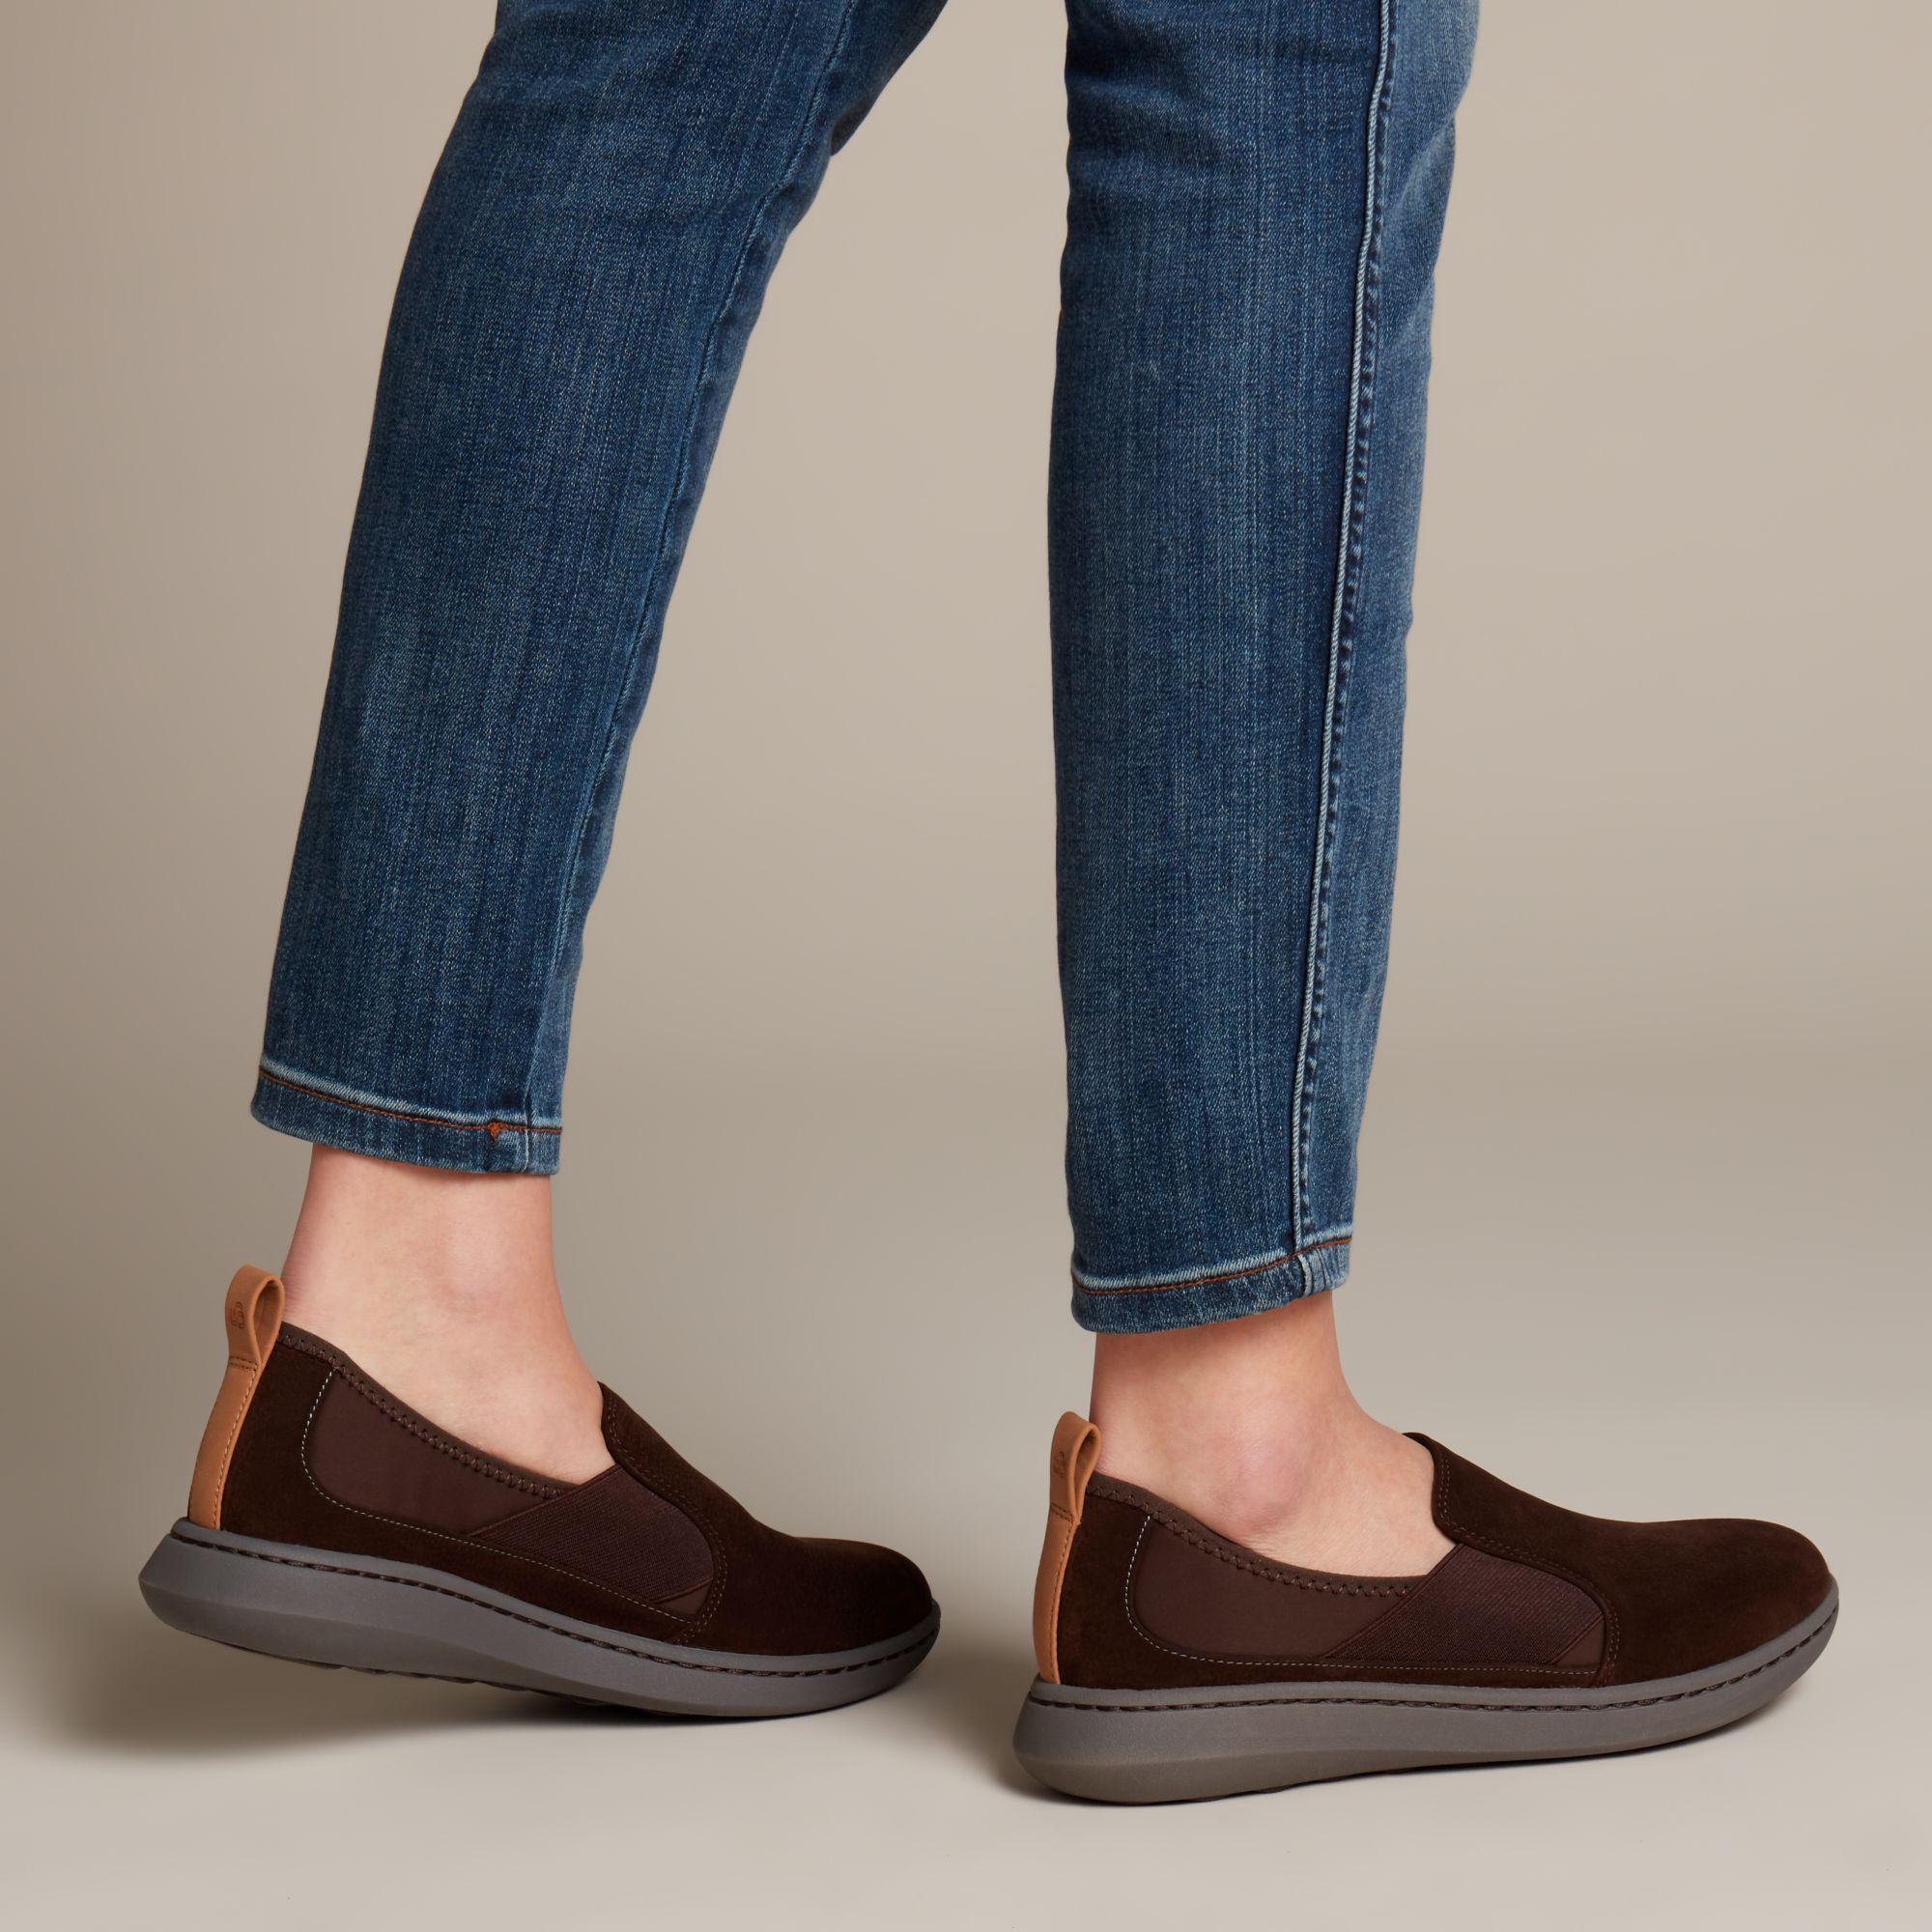 clarks cloudsteppers step move jump